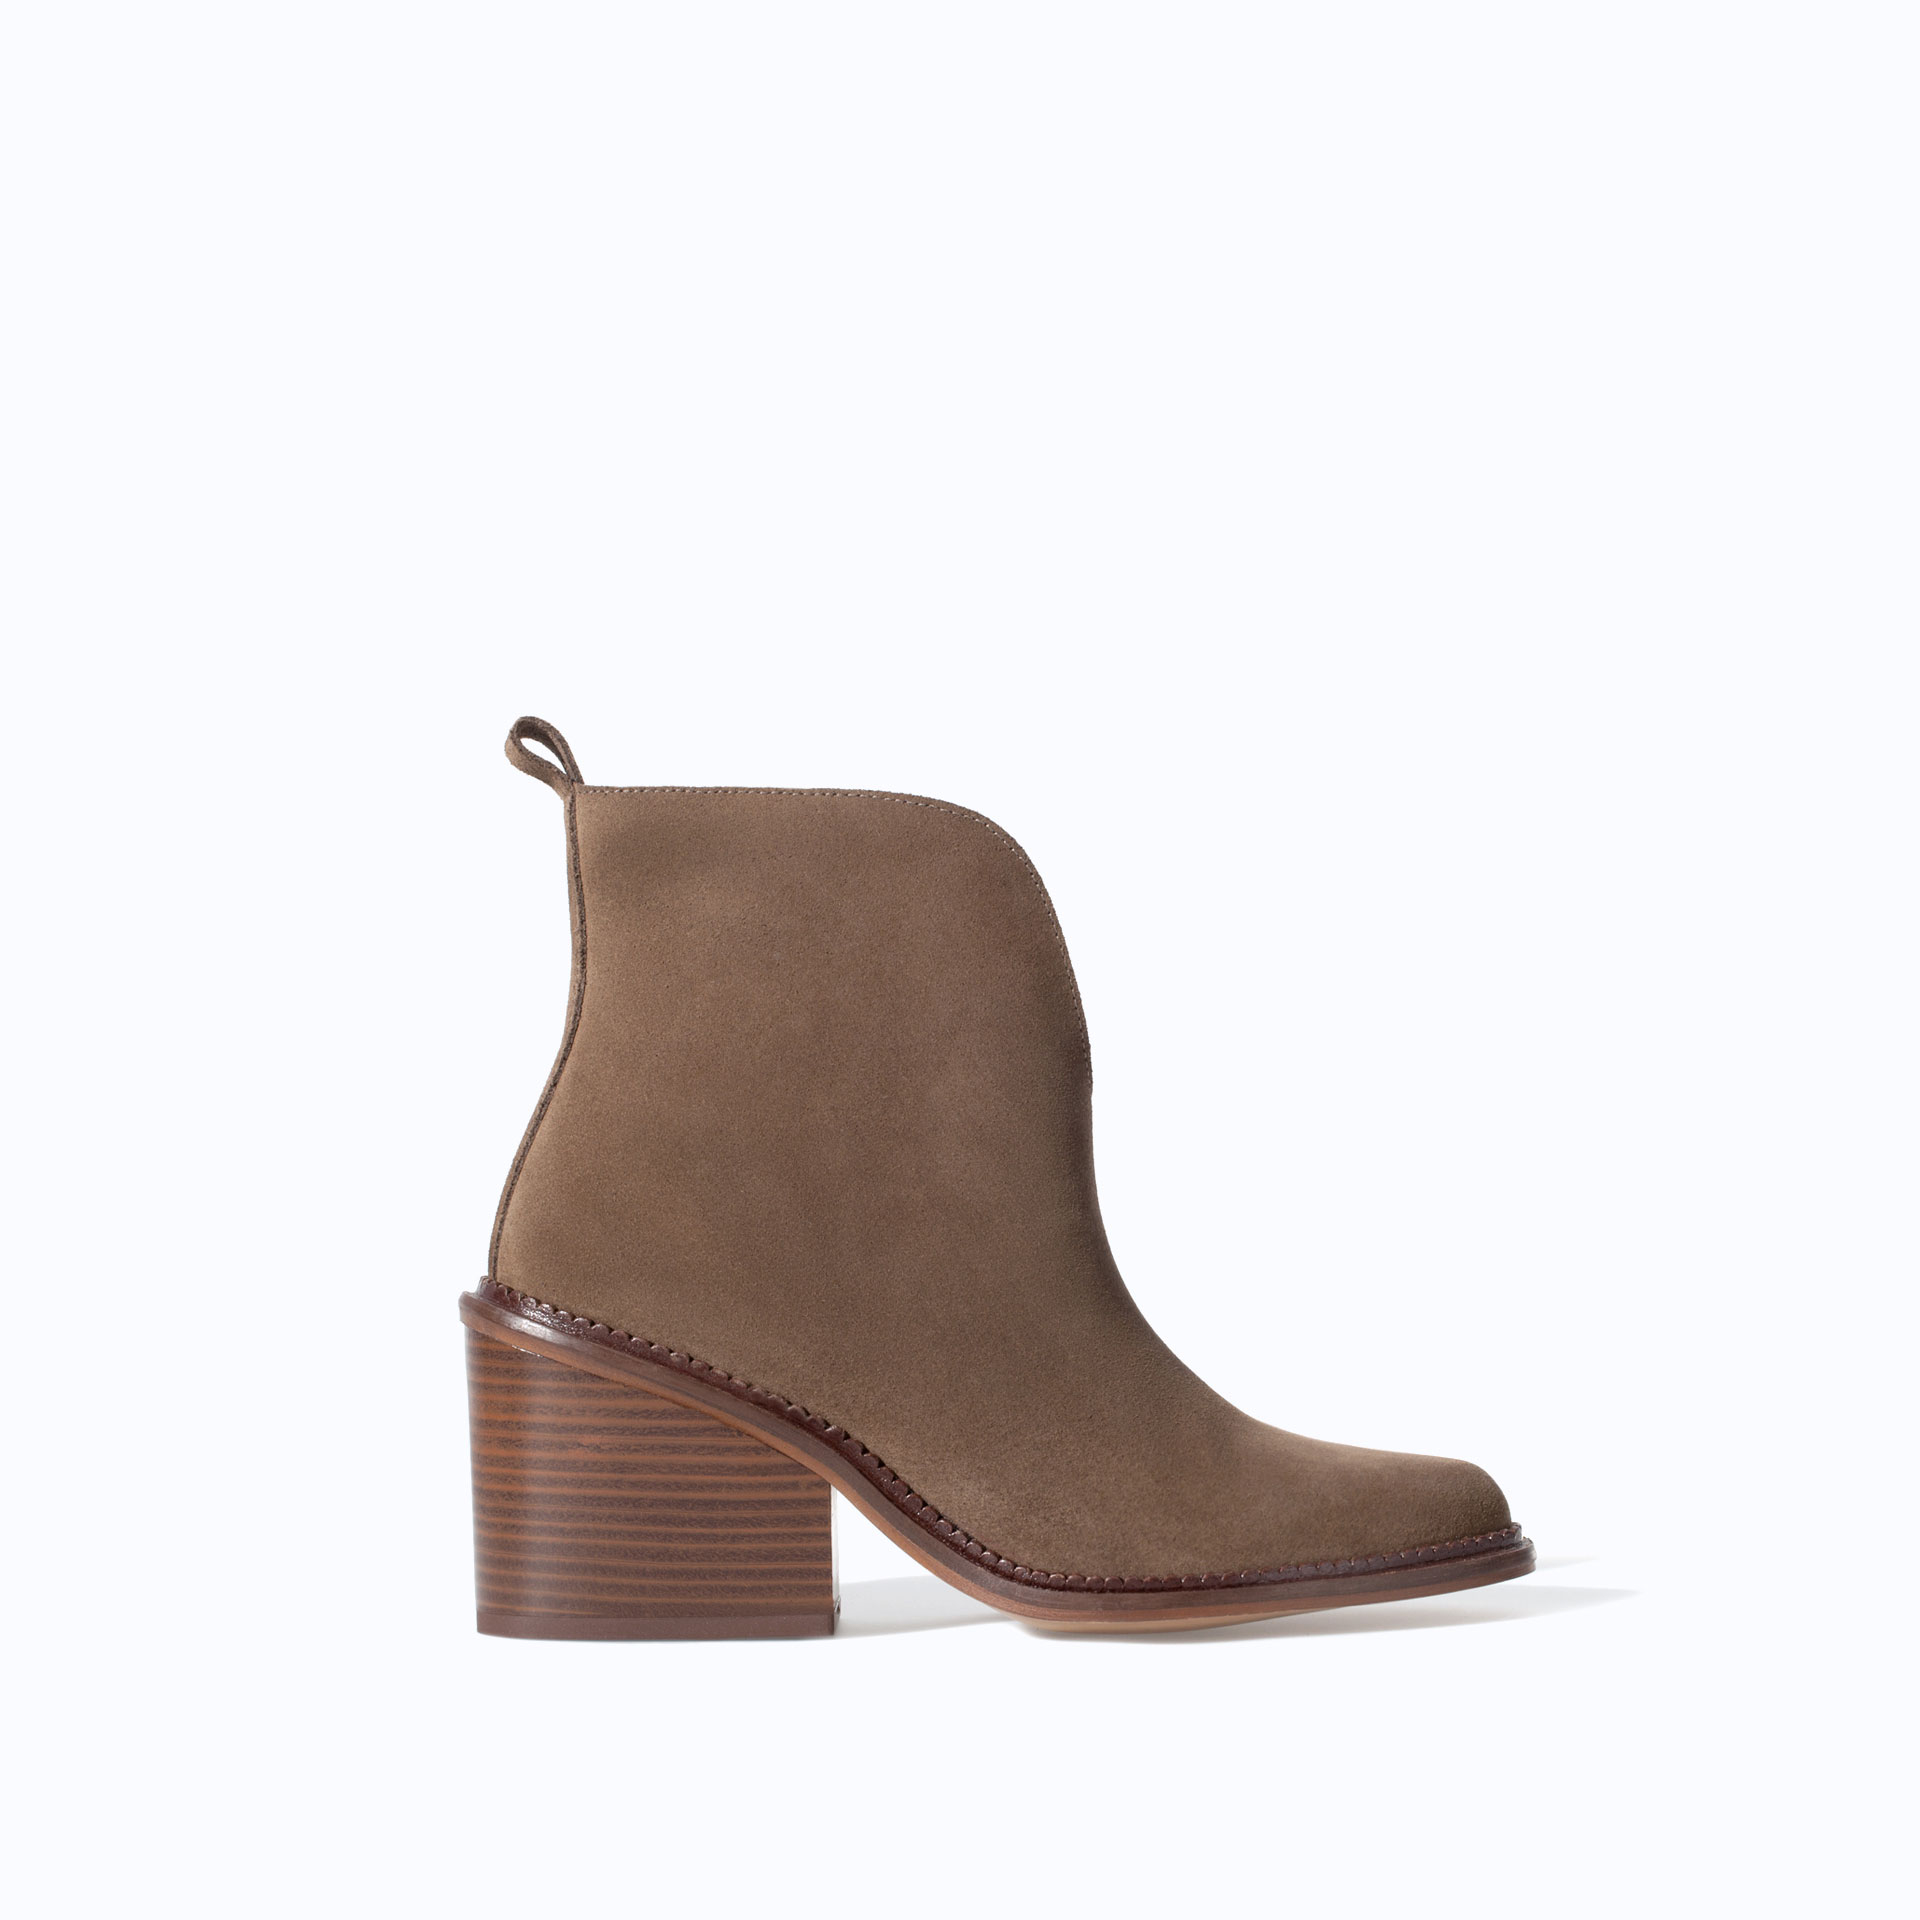 Zara Low Cut Leather Ankle Boot in Gray (Taupe)